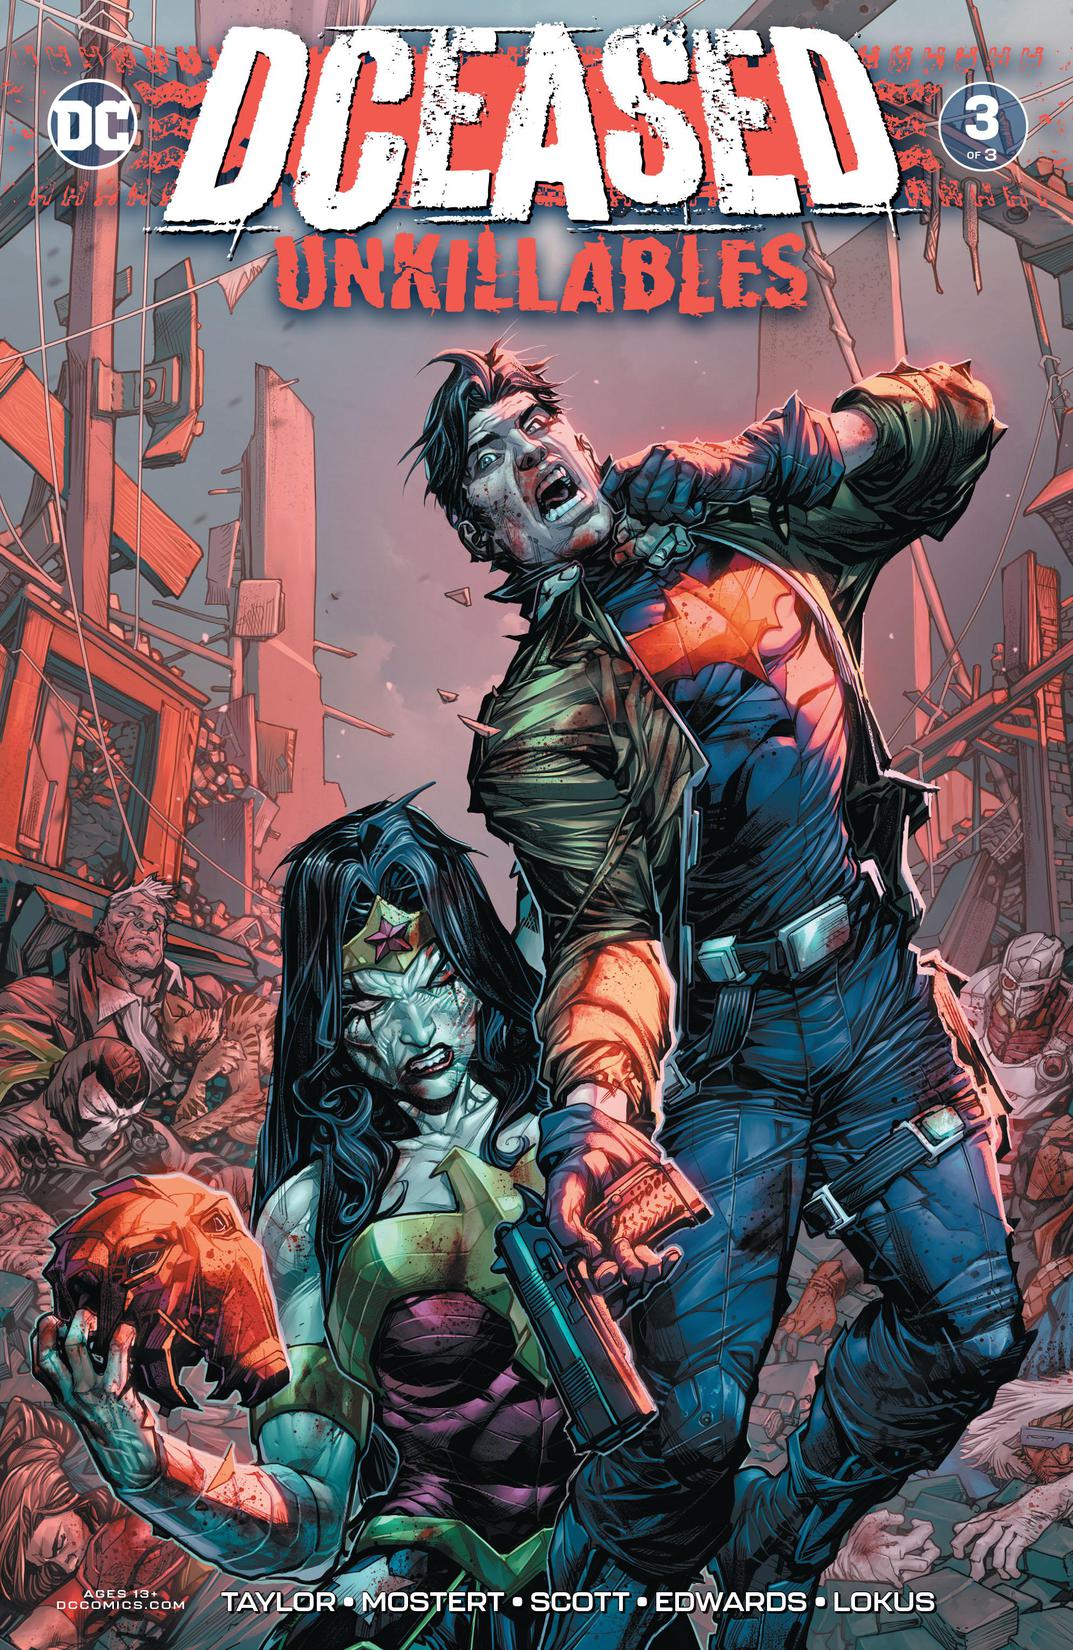 DCeased: Unkillables #3 preview images